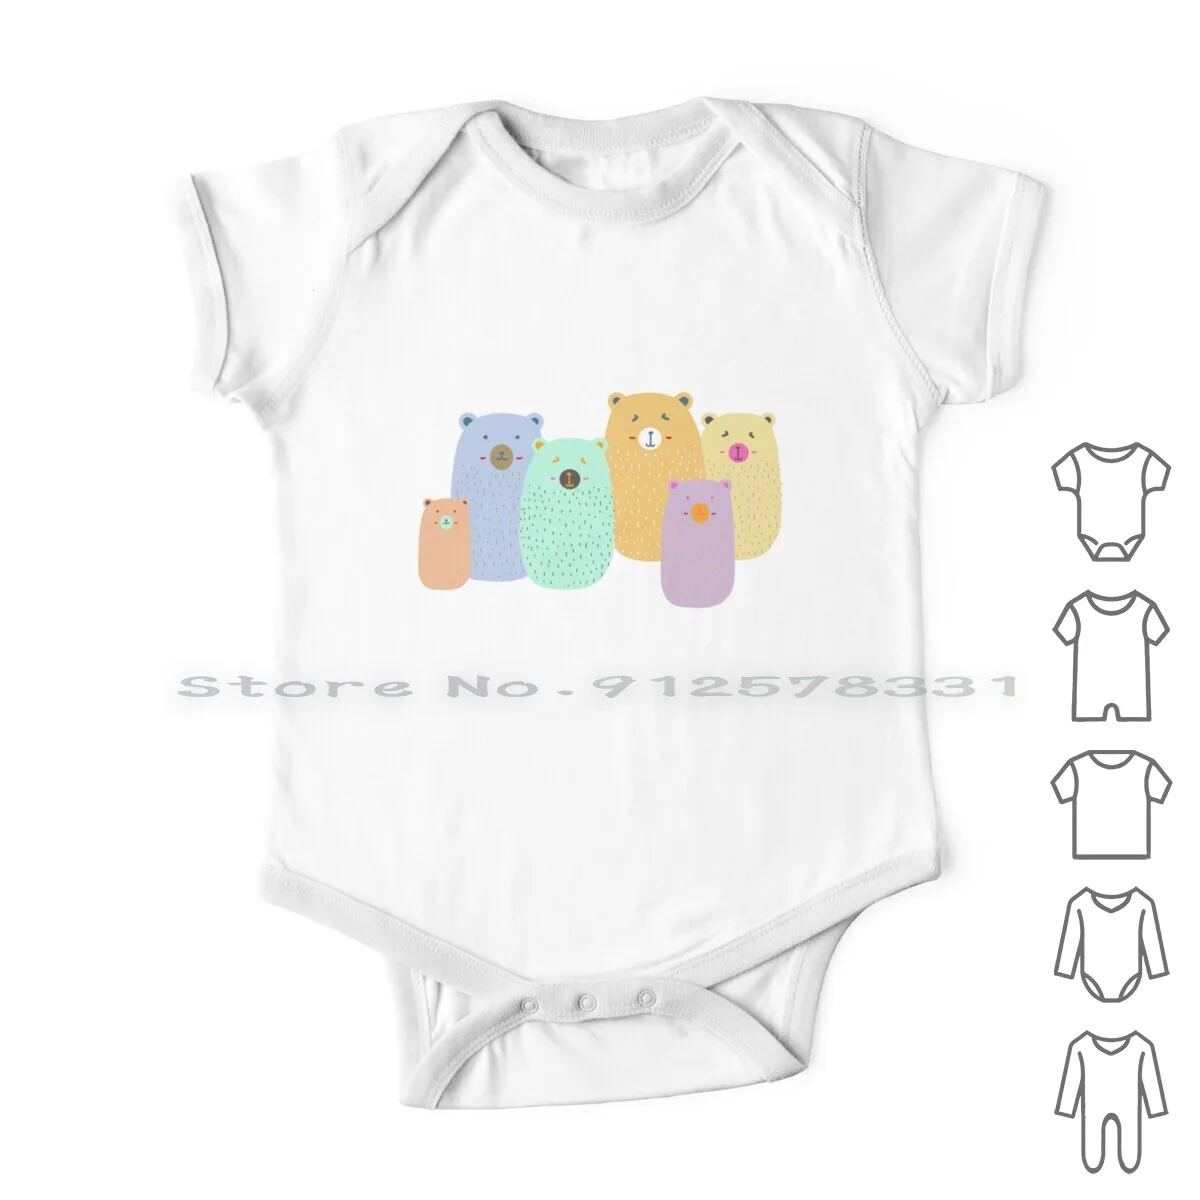 

Happy Baby-Teddy Bears Newborn Baby Clothes Rompers Cotton Jumpsuits For Kids Babies Fashion Little Boys Fashion Little Girls